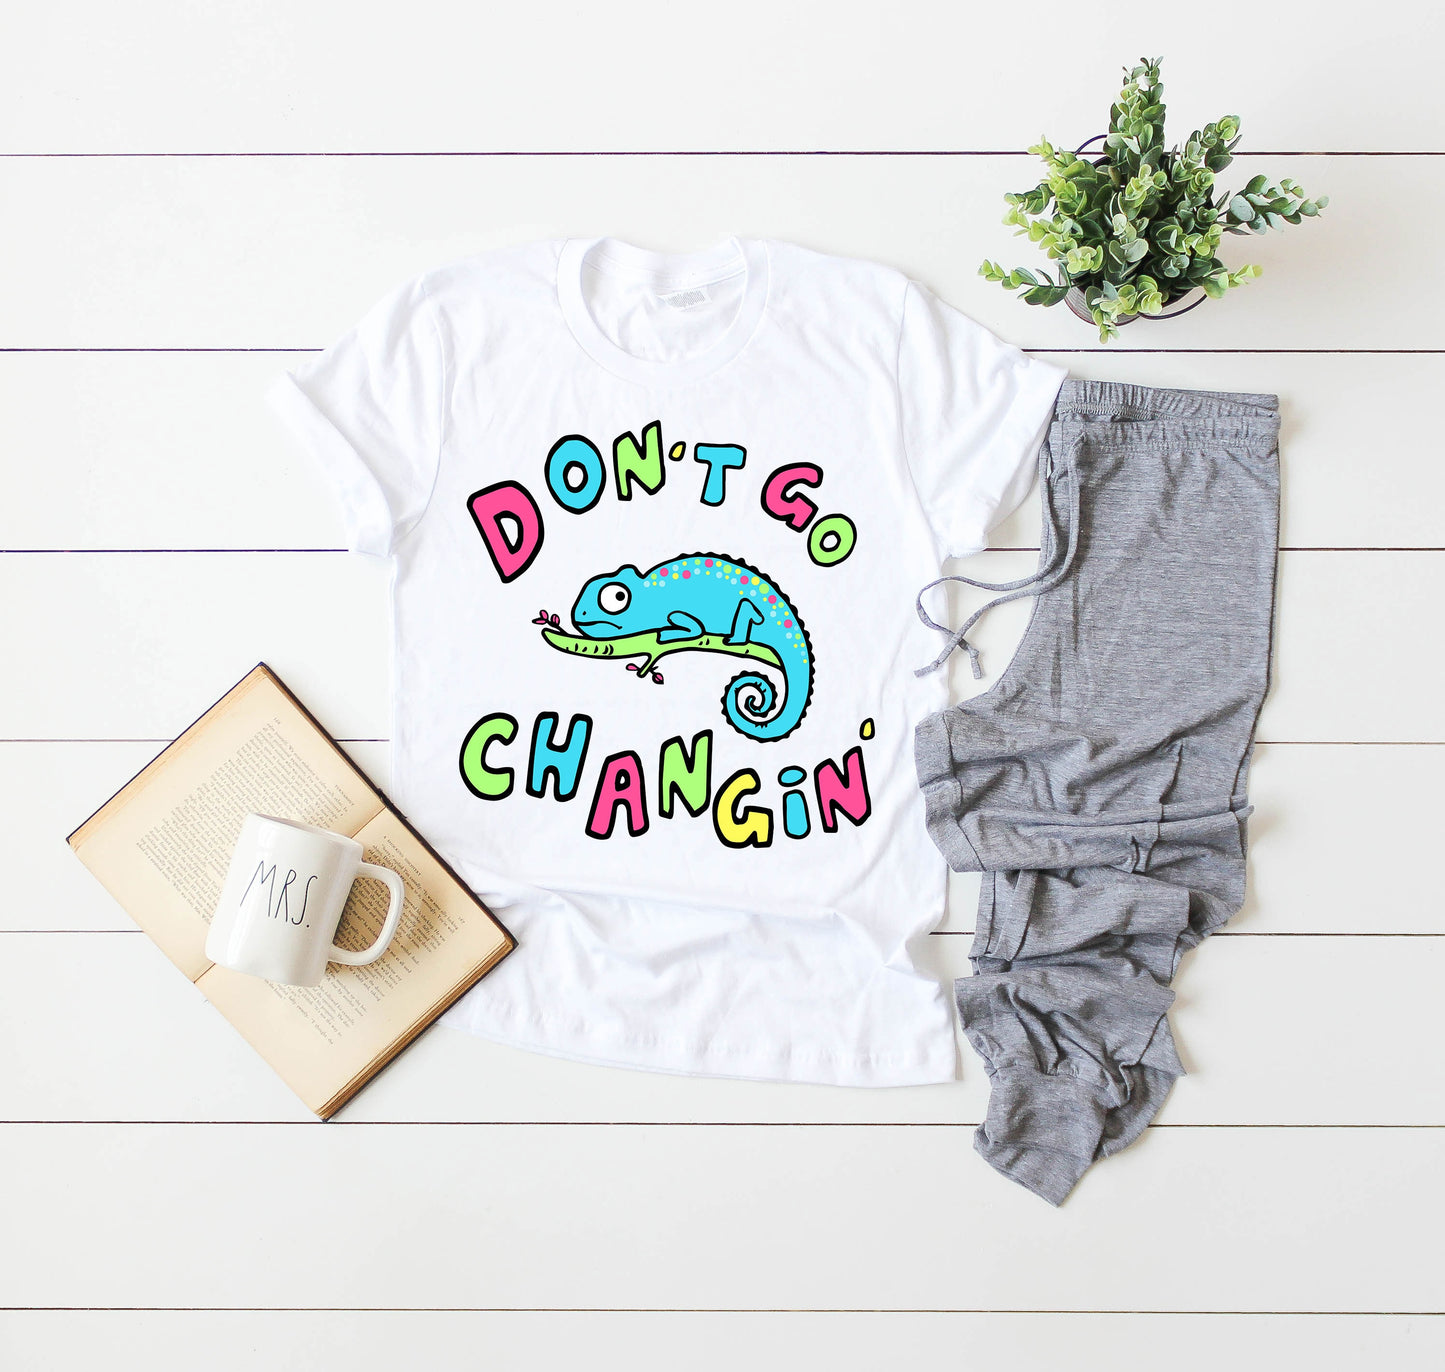 Don't Go Changing Cute Chameleon Animal Graphic Tee (Unisex Bella Canvas for Women / Men)